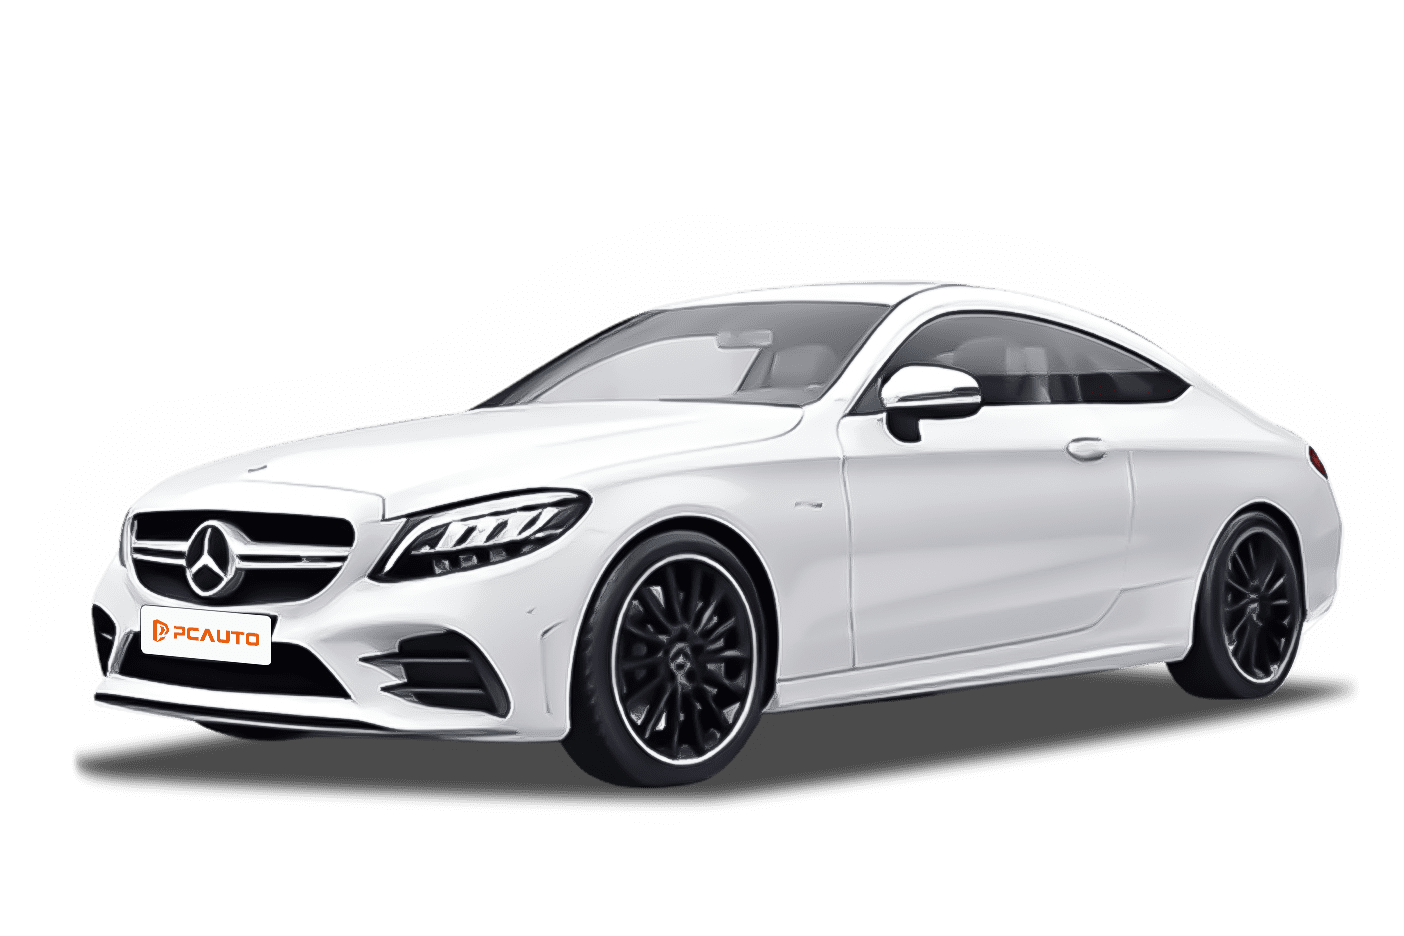 Mercedes-Benz AMG C-Class Coupe